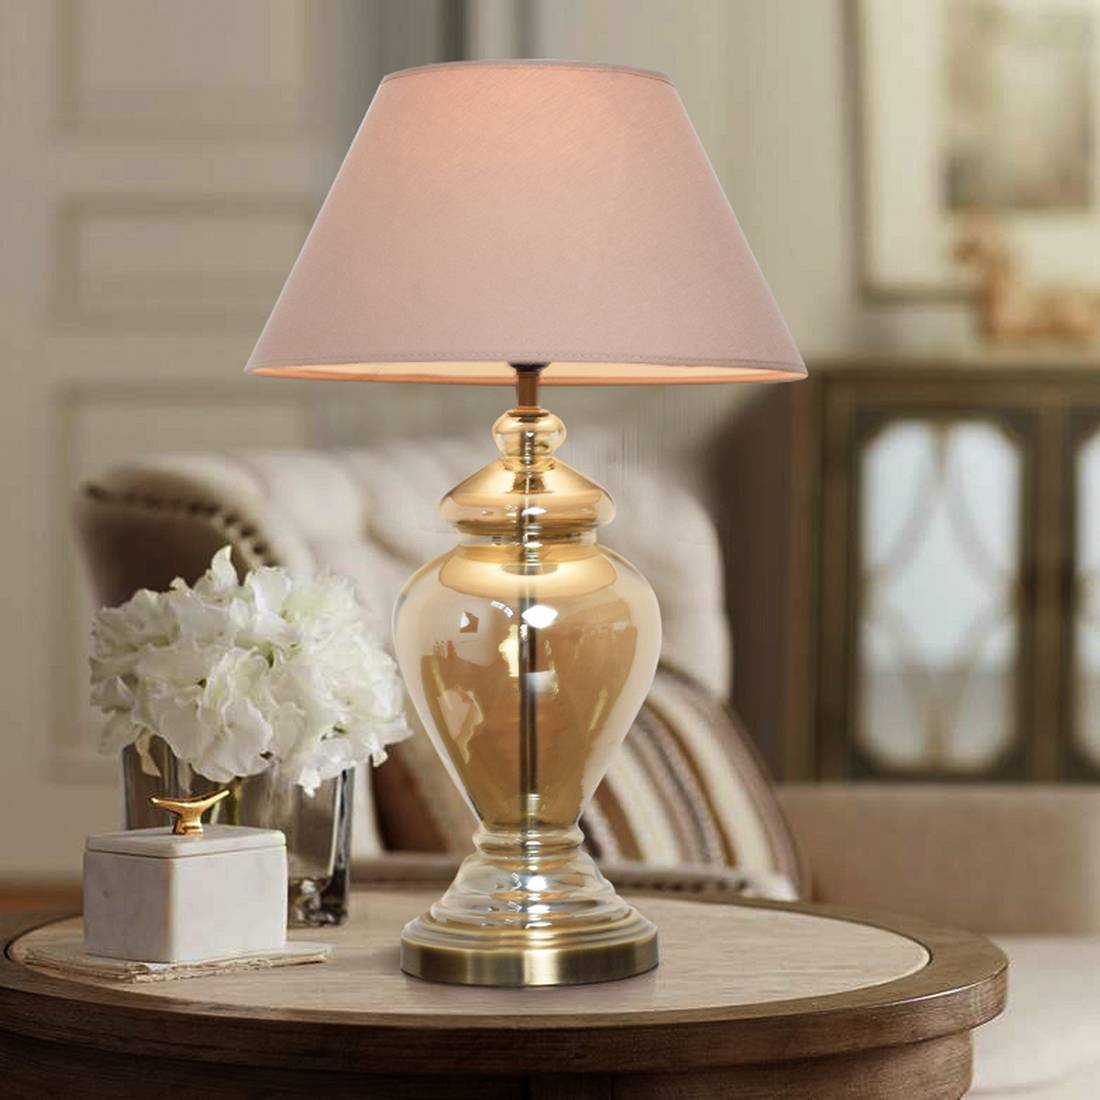 get upto 50% off on table lamps online in india | shop now - urban